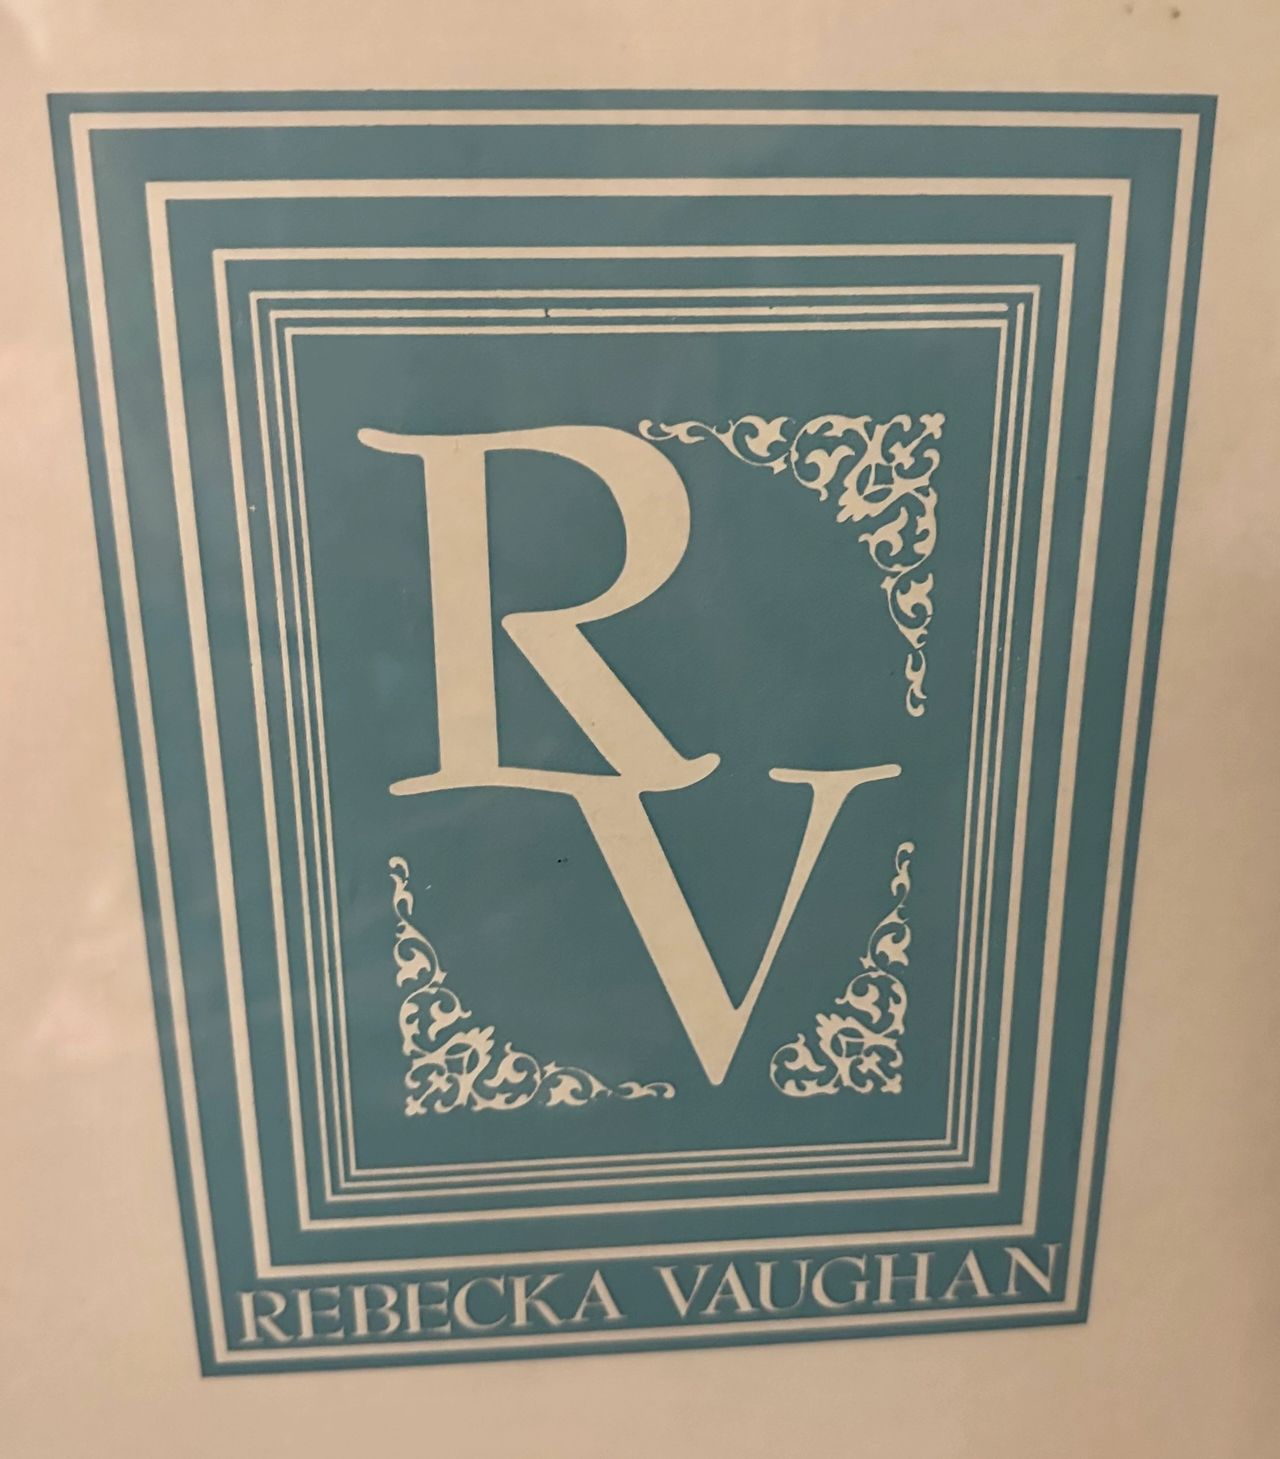 Rebecka Vaughan Lingerie. Fitting specialists since 1979.: You'll